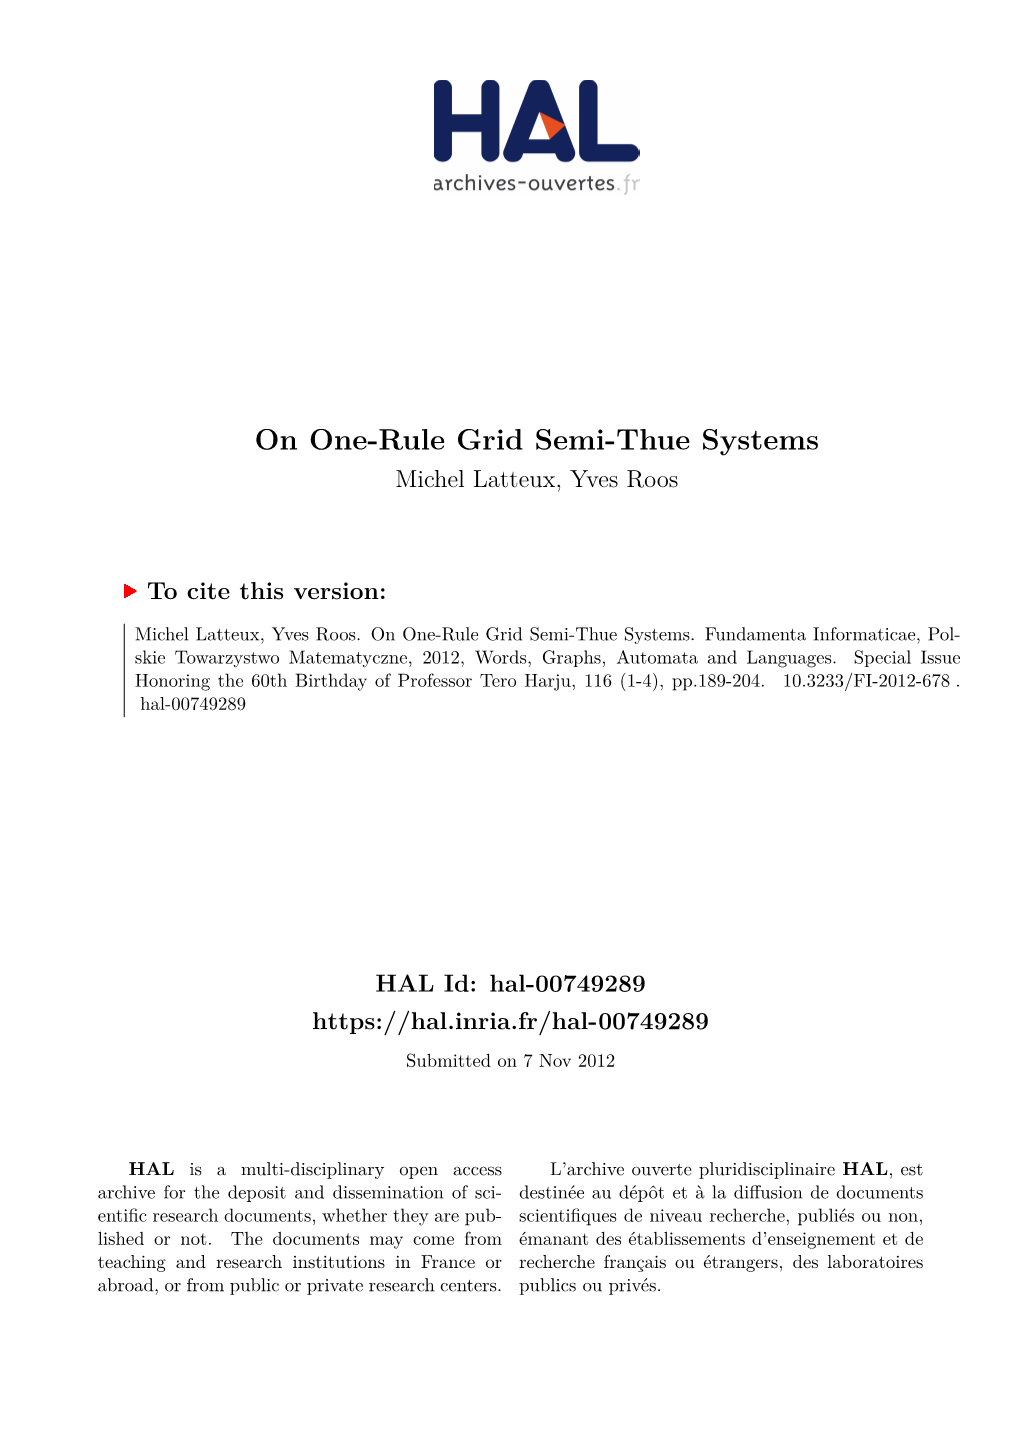 On One-Rule Grid Semi-Thue Systems Michel Latteux, Yves Roos